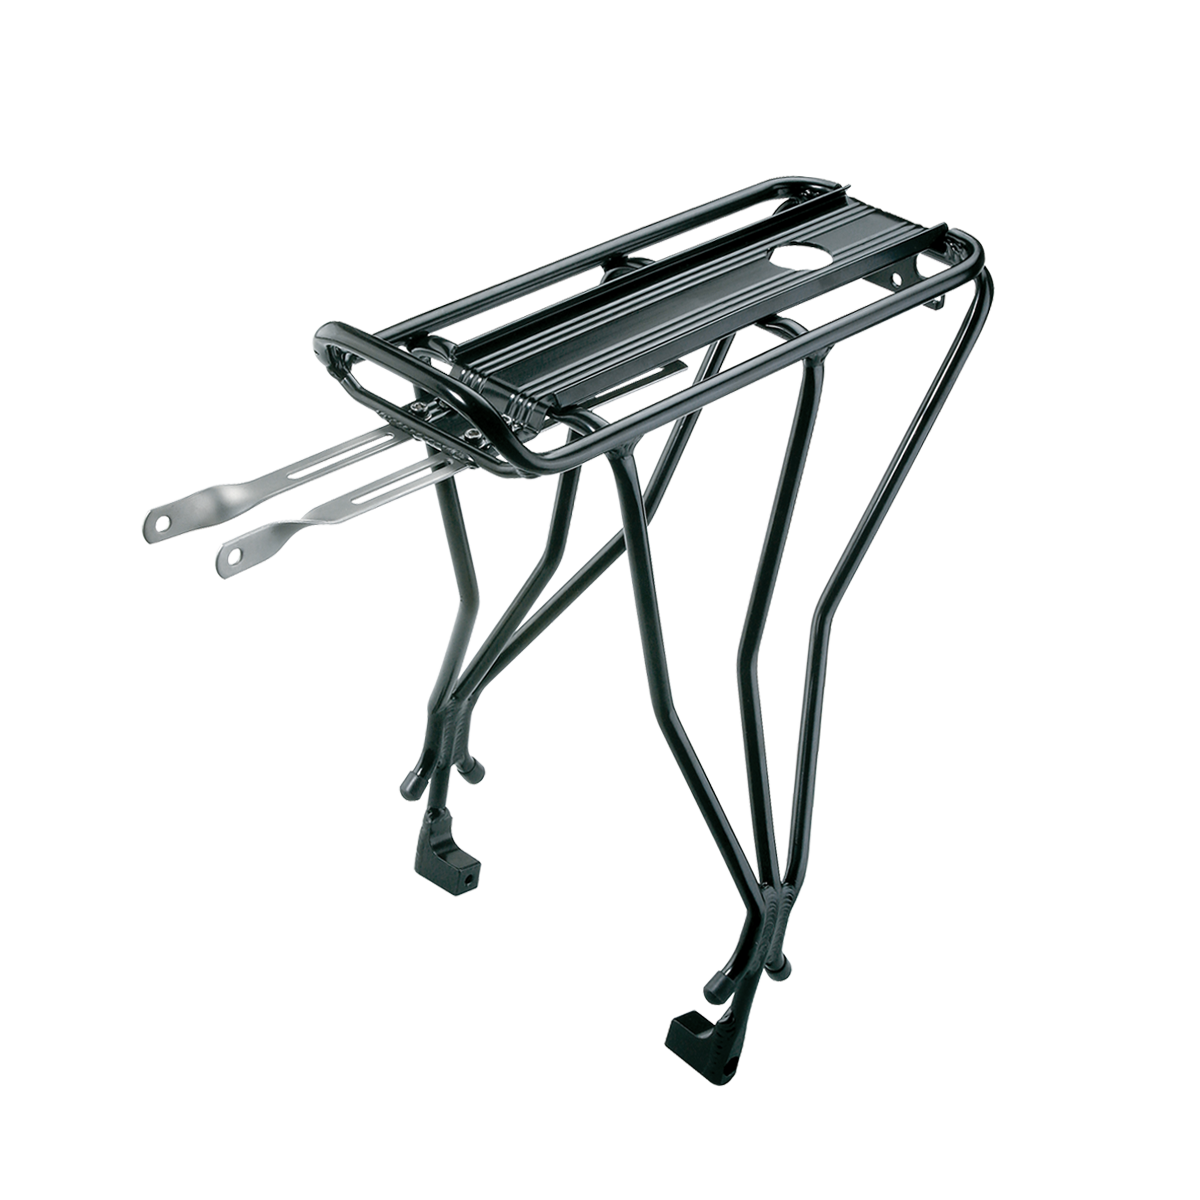 TRK-R023 Baby Seat Rack Topeak Rear Rack Long Mounting Arms for Small Frames 